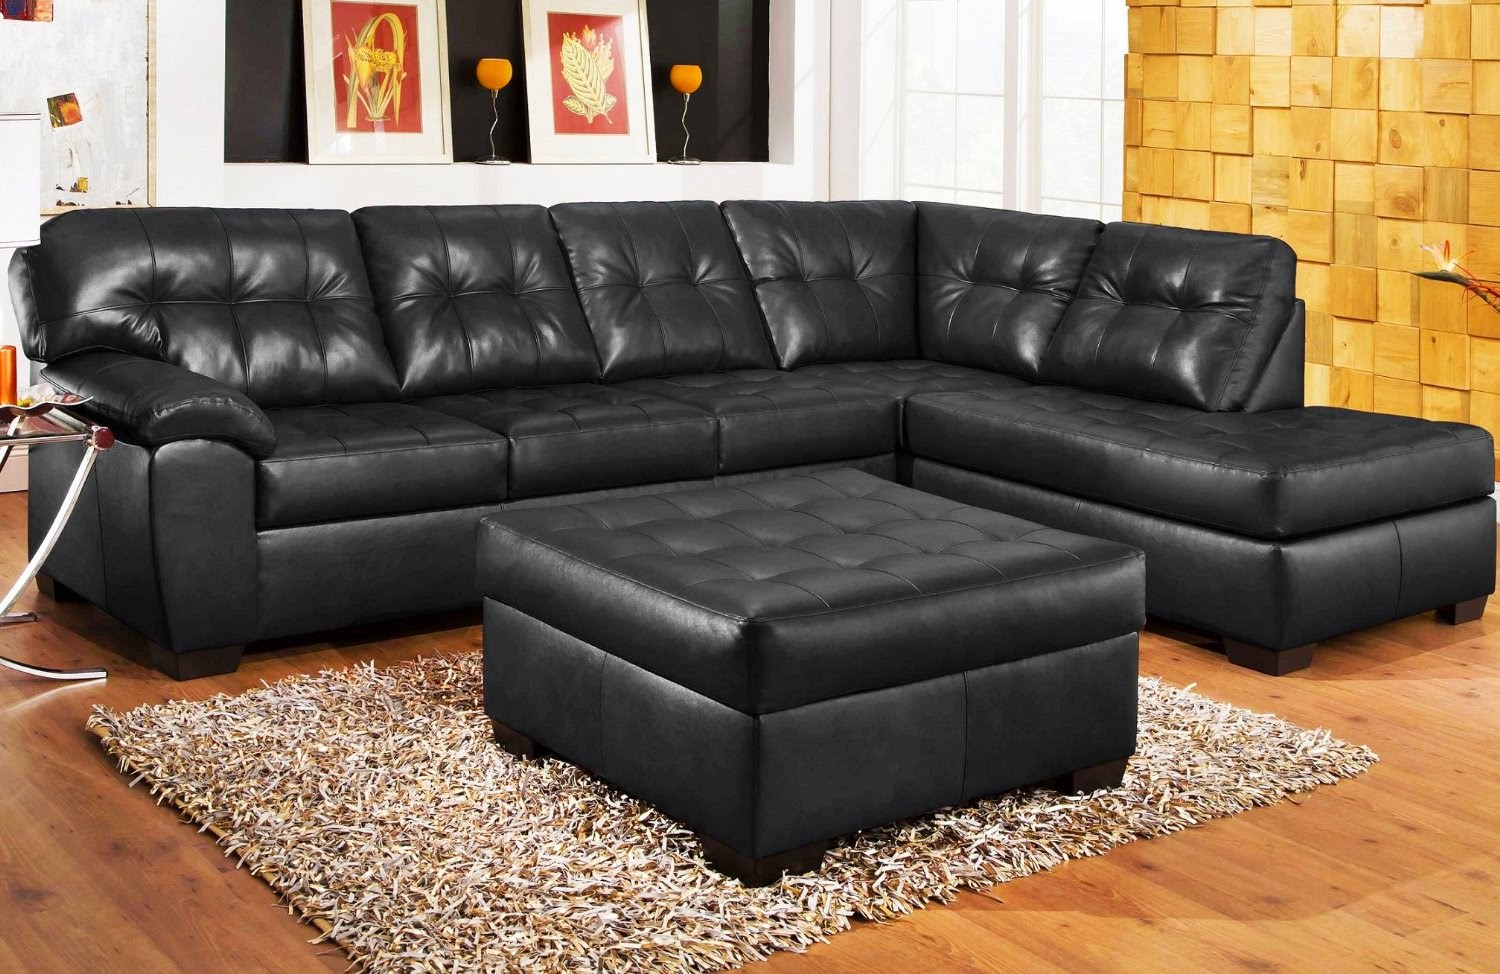 Black Leather Couch Setjpg